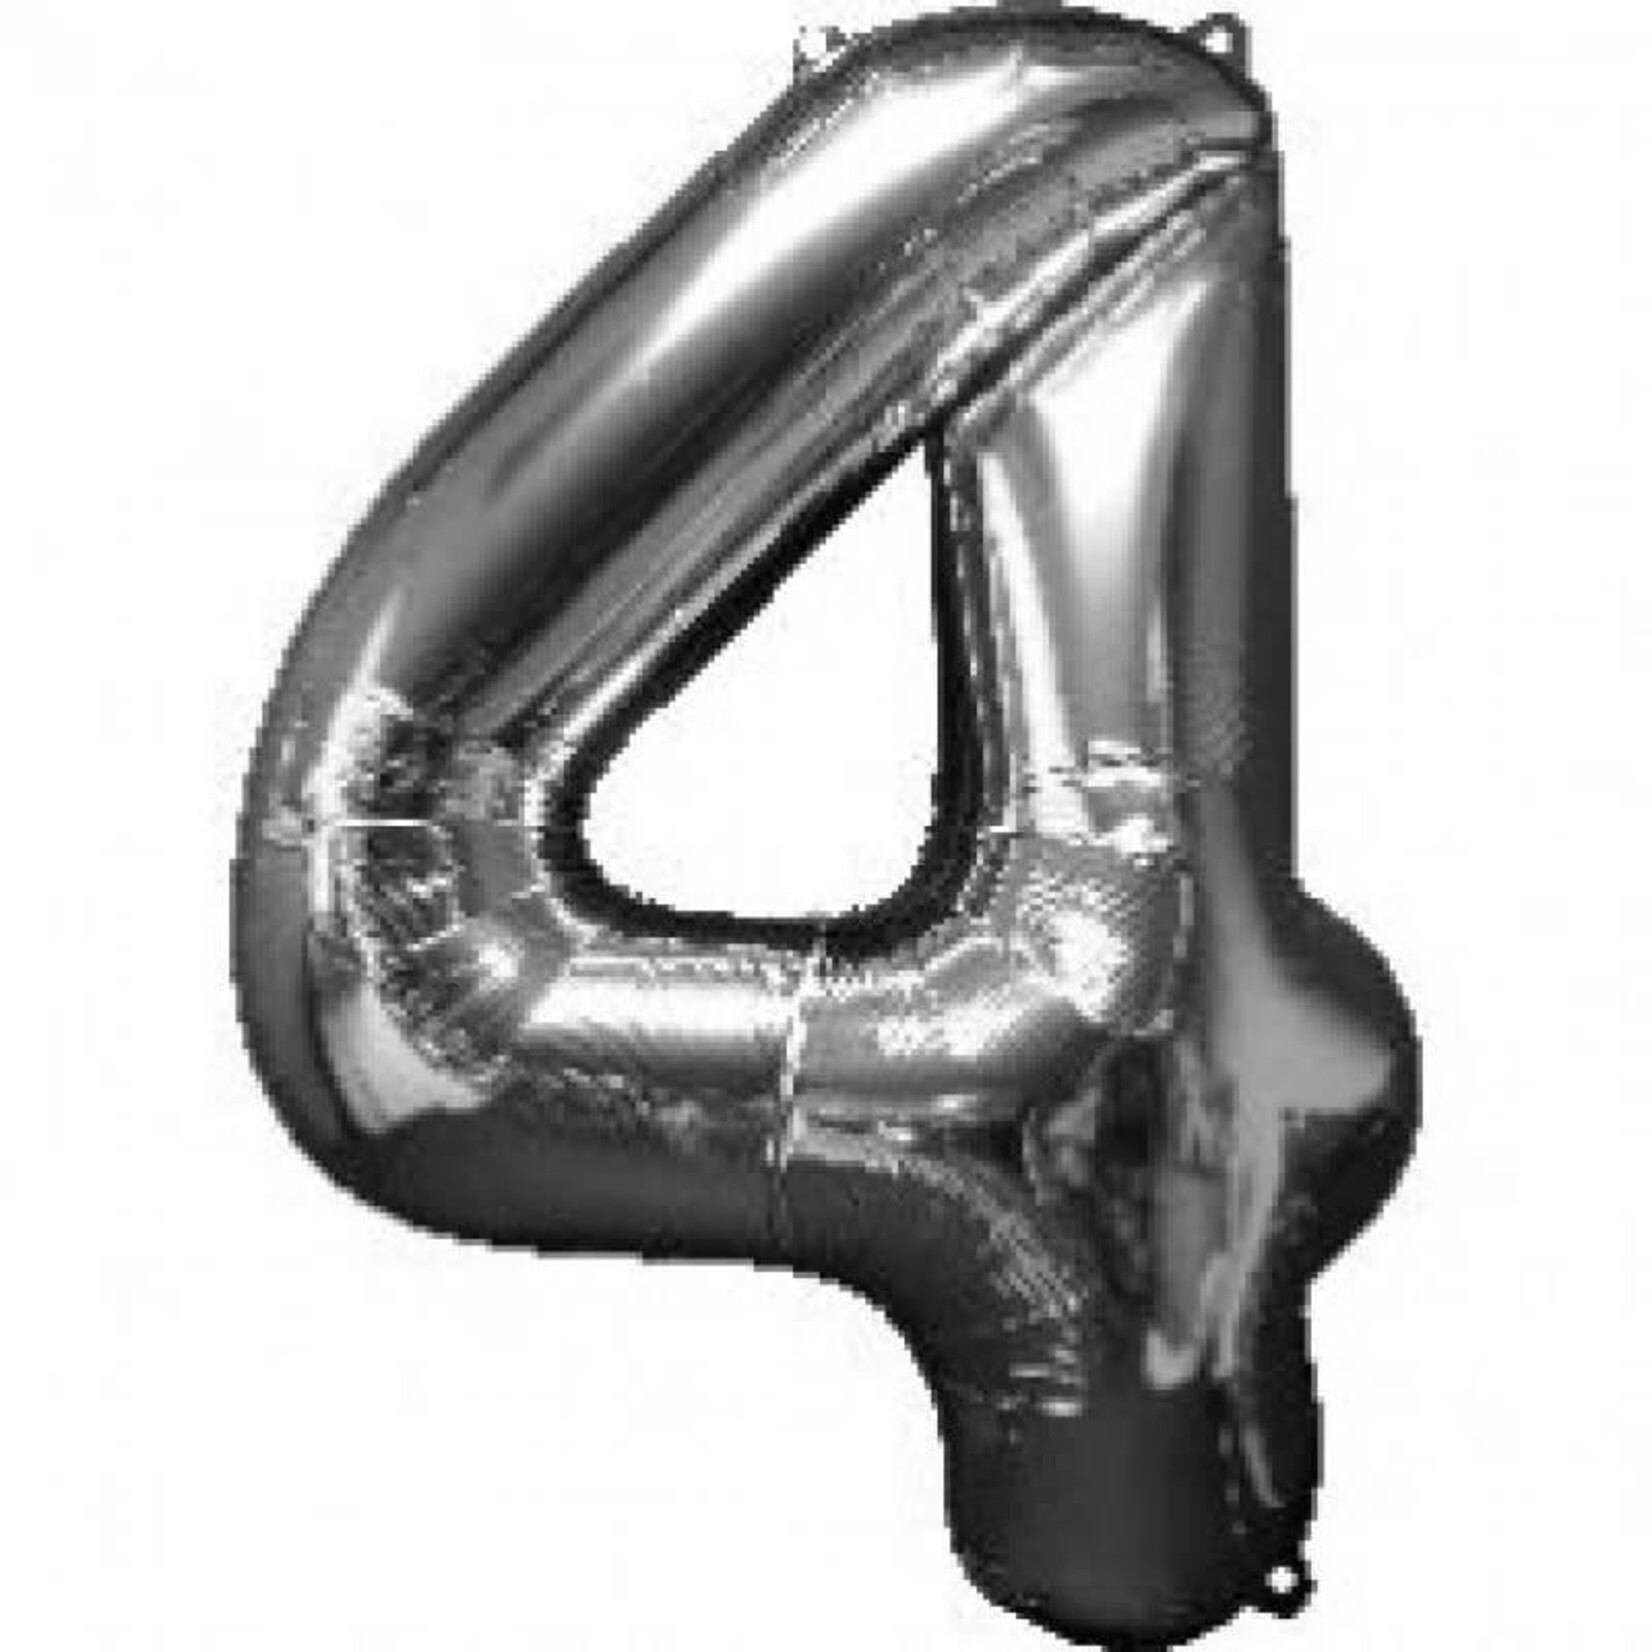 Foil Number Balloon 34 Inches Silver